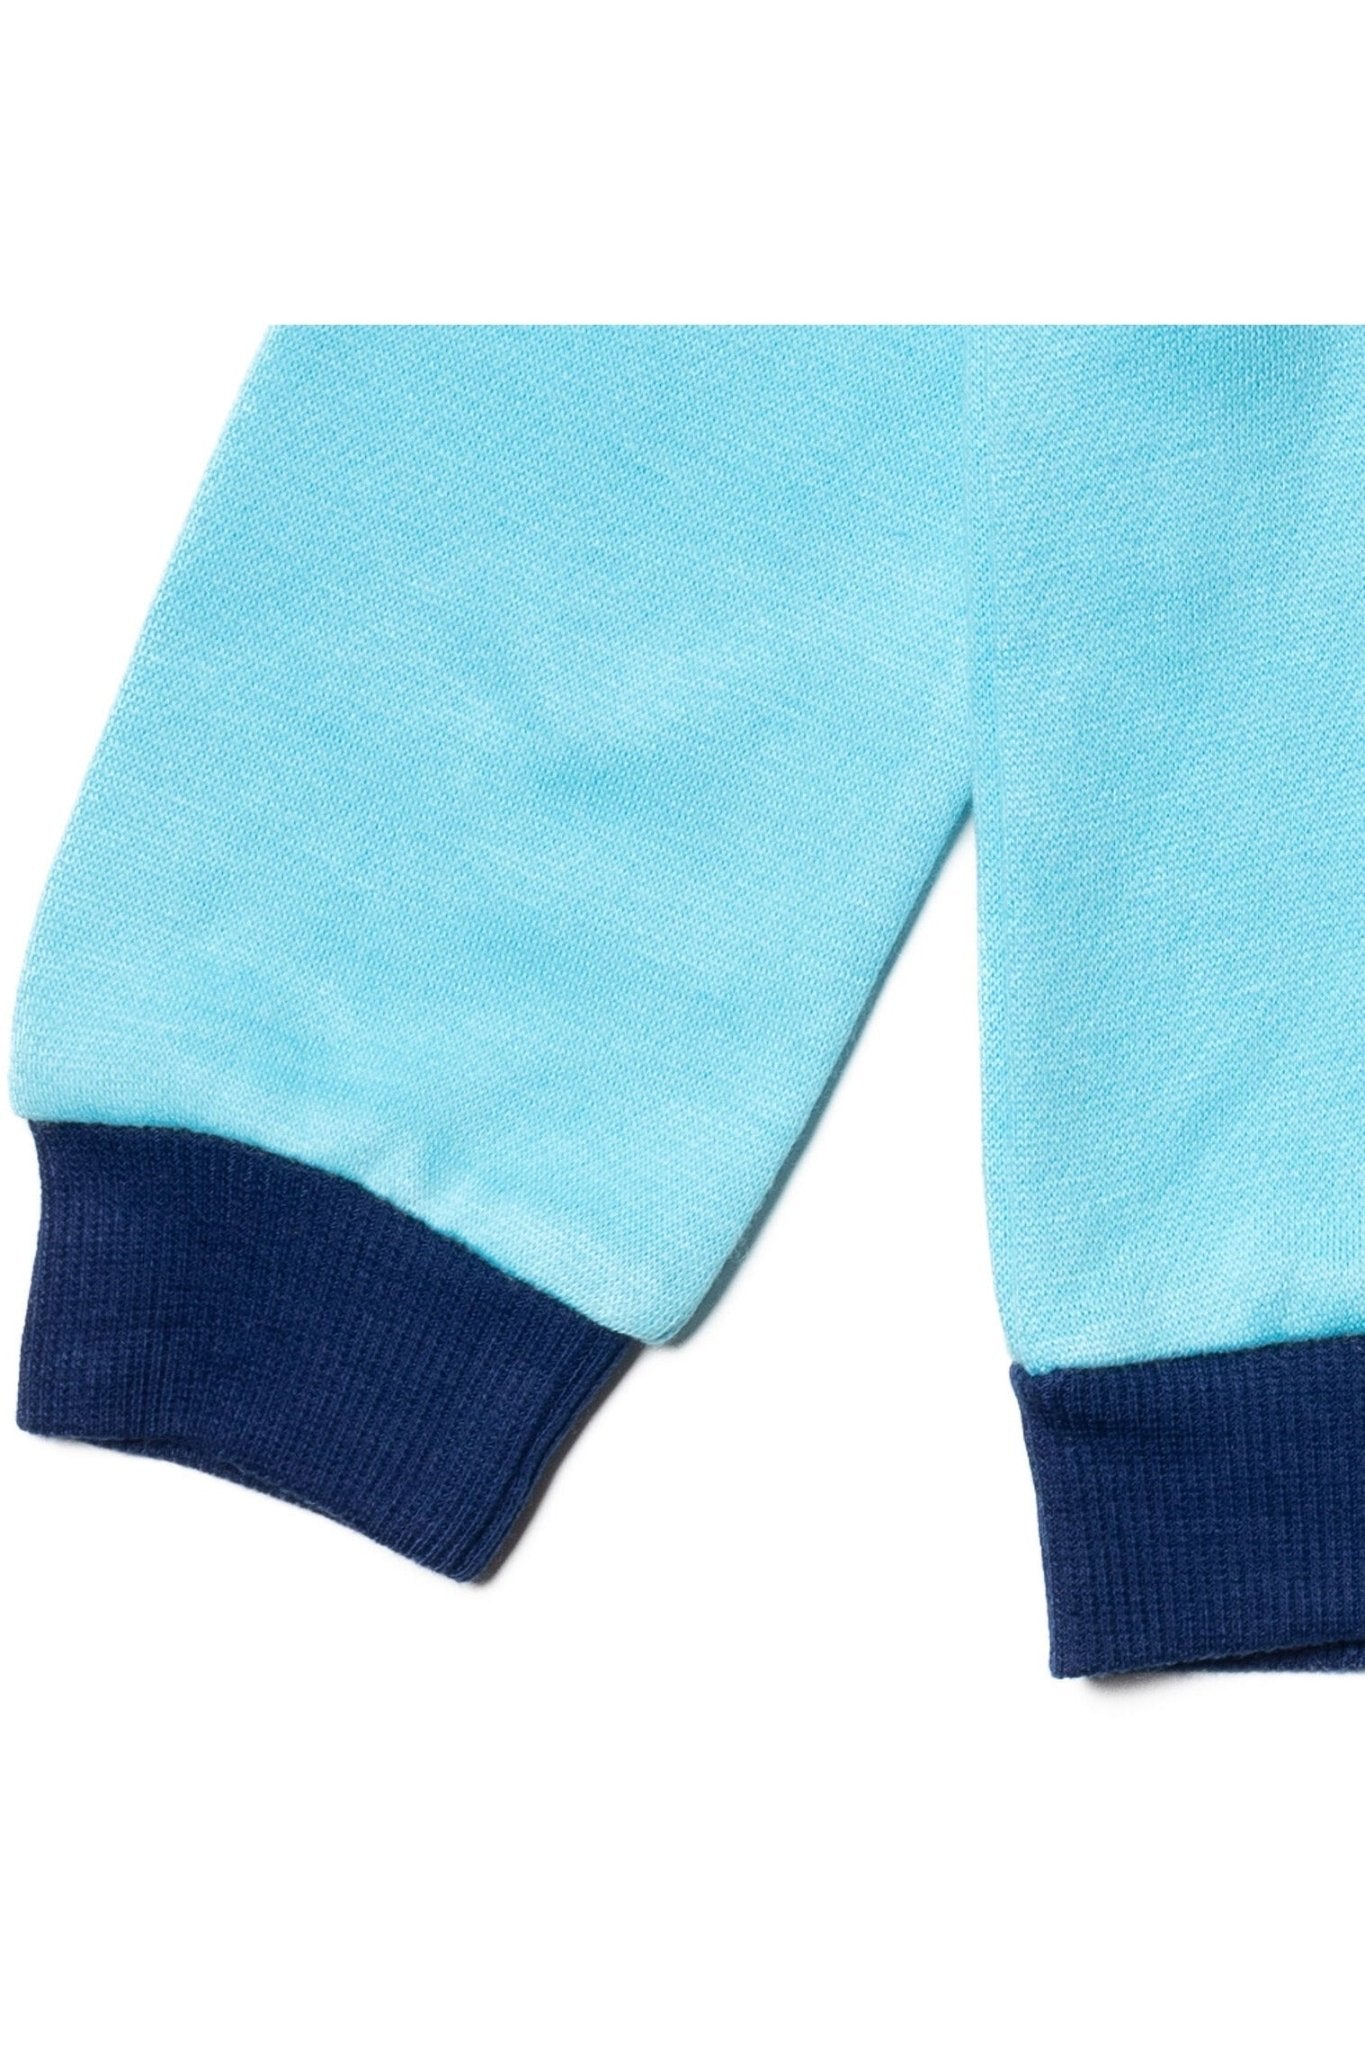 Blue's Clues & You! Baby Fleece Pullover Sweatshirt Infant to Toddler - imagikids